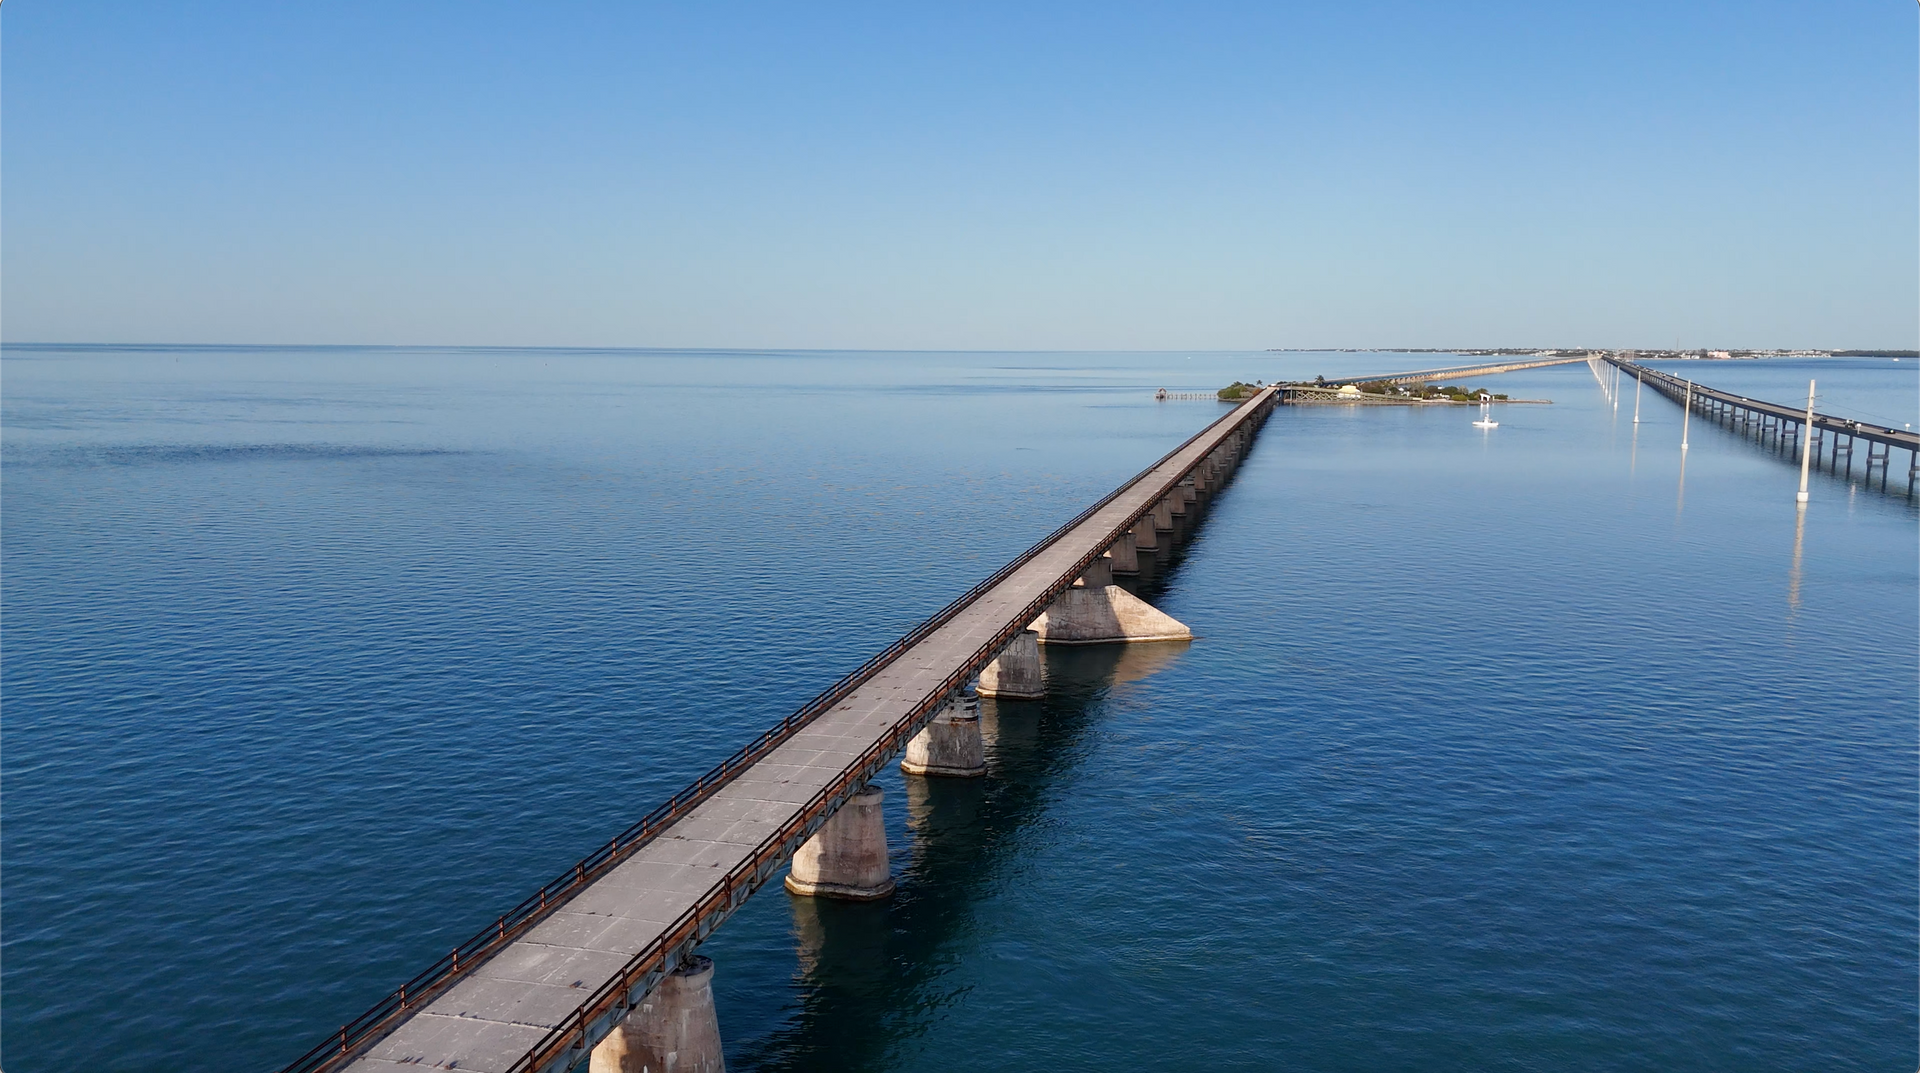 Visiting Key West, the 7 mile bridge is a  beauty, take a hop off  tour on conch tour train, visit old town, yes old town is really nice. Go check out our living coral reef.